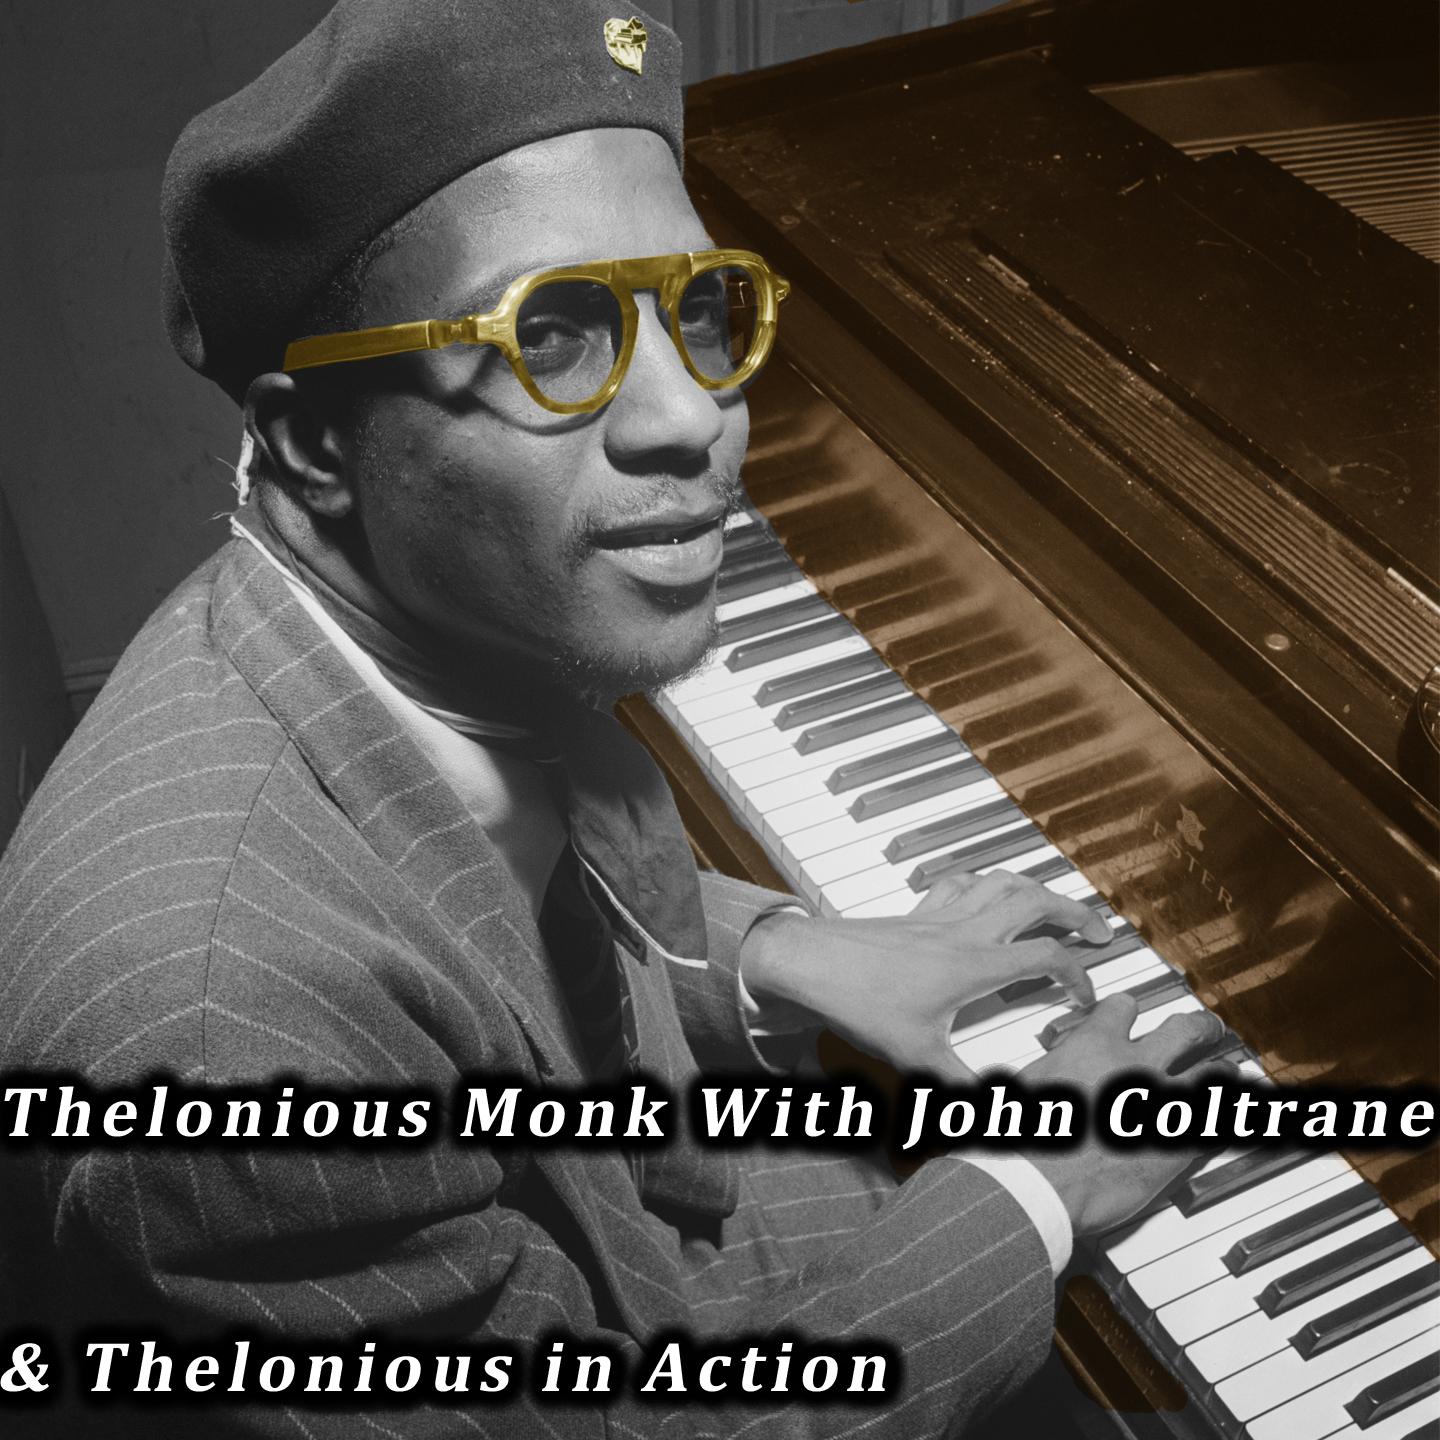 Thelonious Monk with John Coltrane & Thelonious in Action